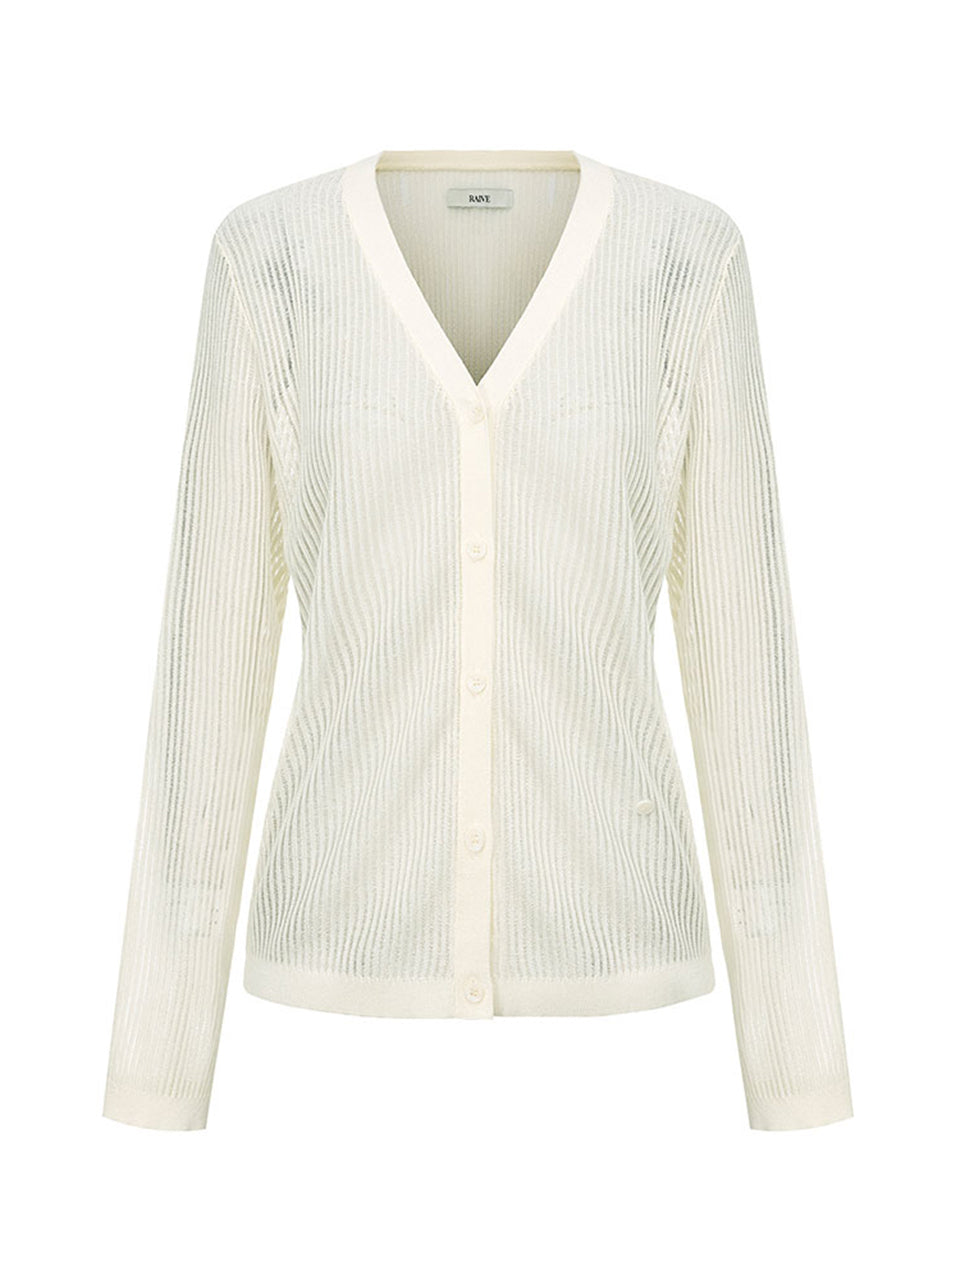 See-through Knit Cardigan in Ivory